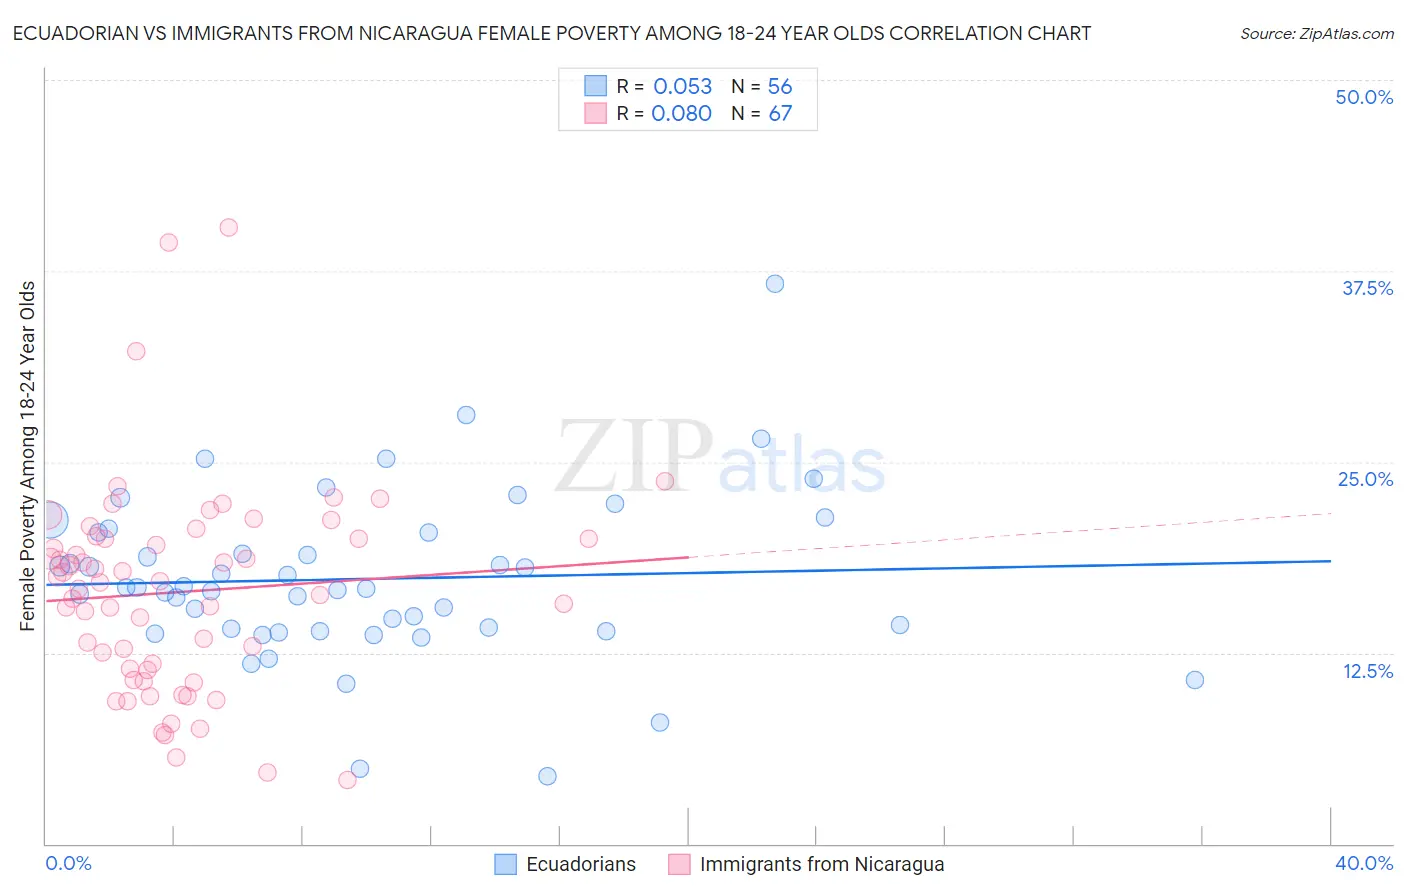 Ecuadorian vs Immigrants from Nicaragua Female Poverty Among 18-24 Year Olds